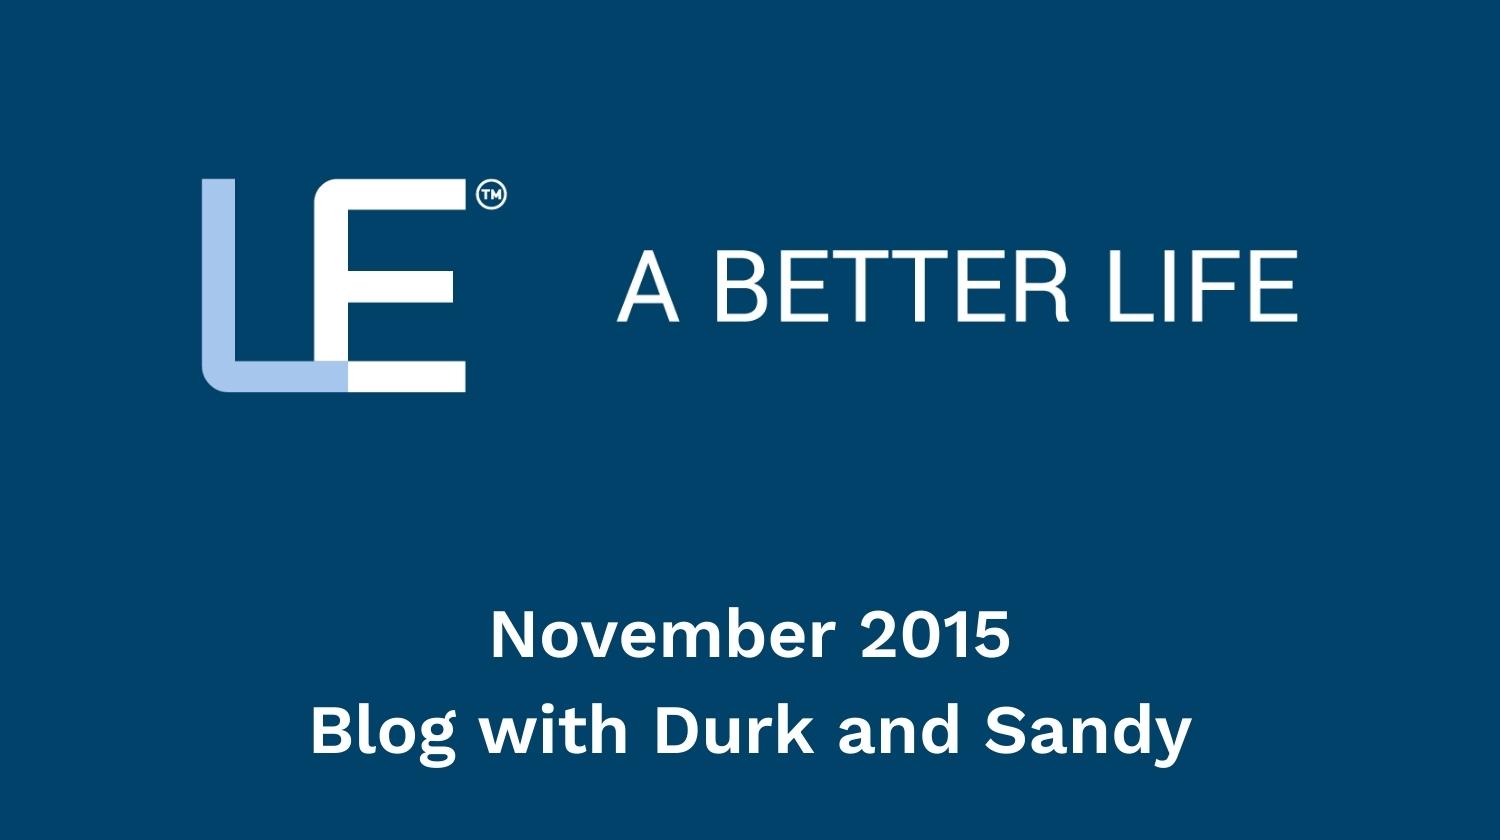 November 2015 Blog with Durk and Sandy